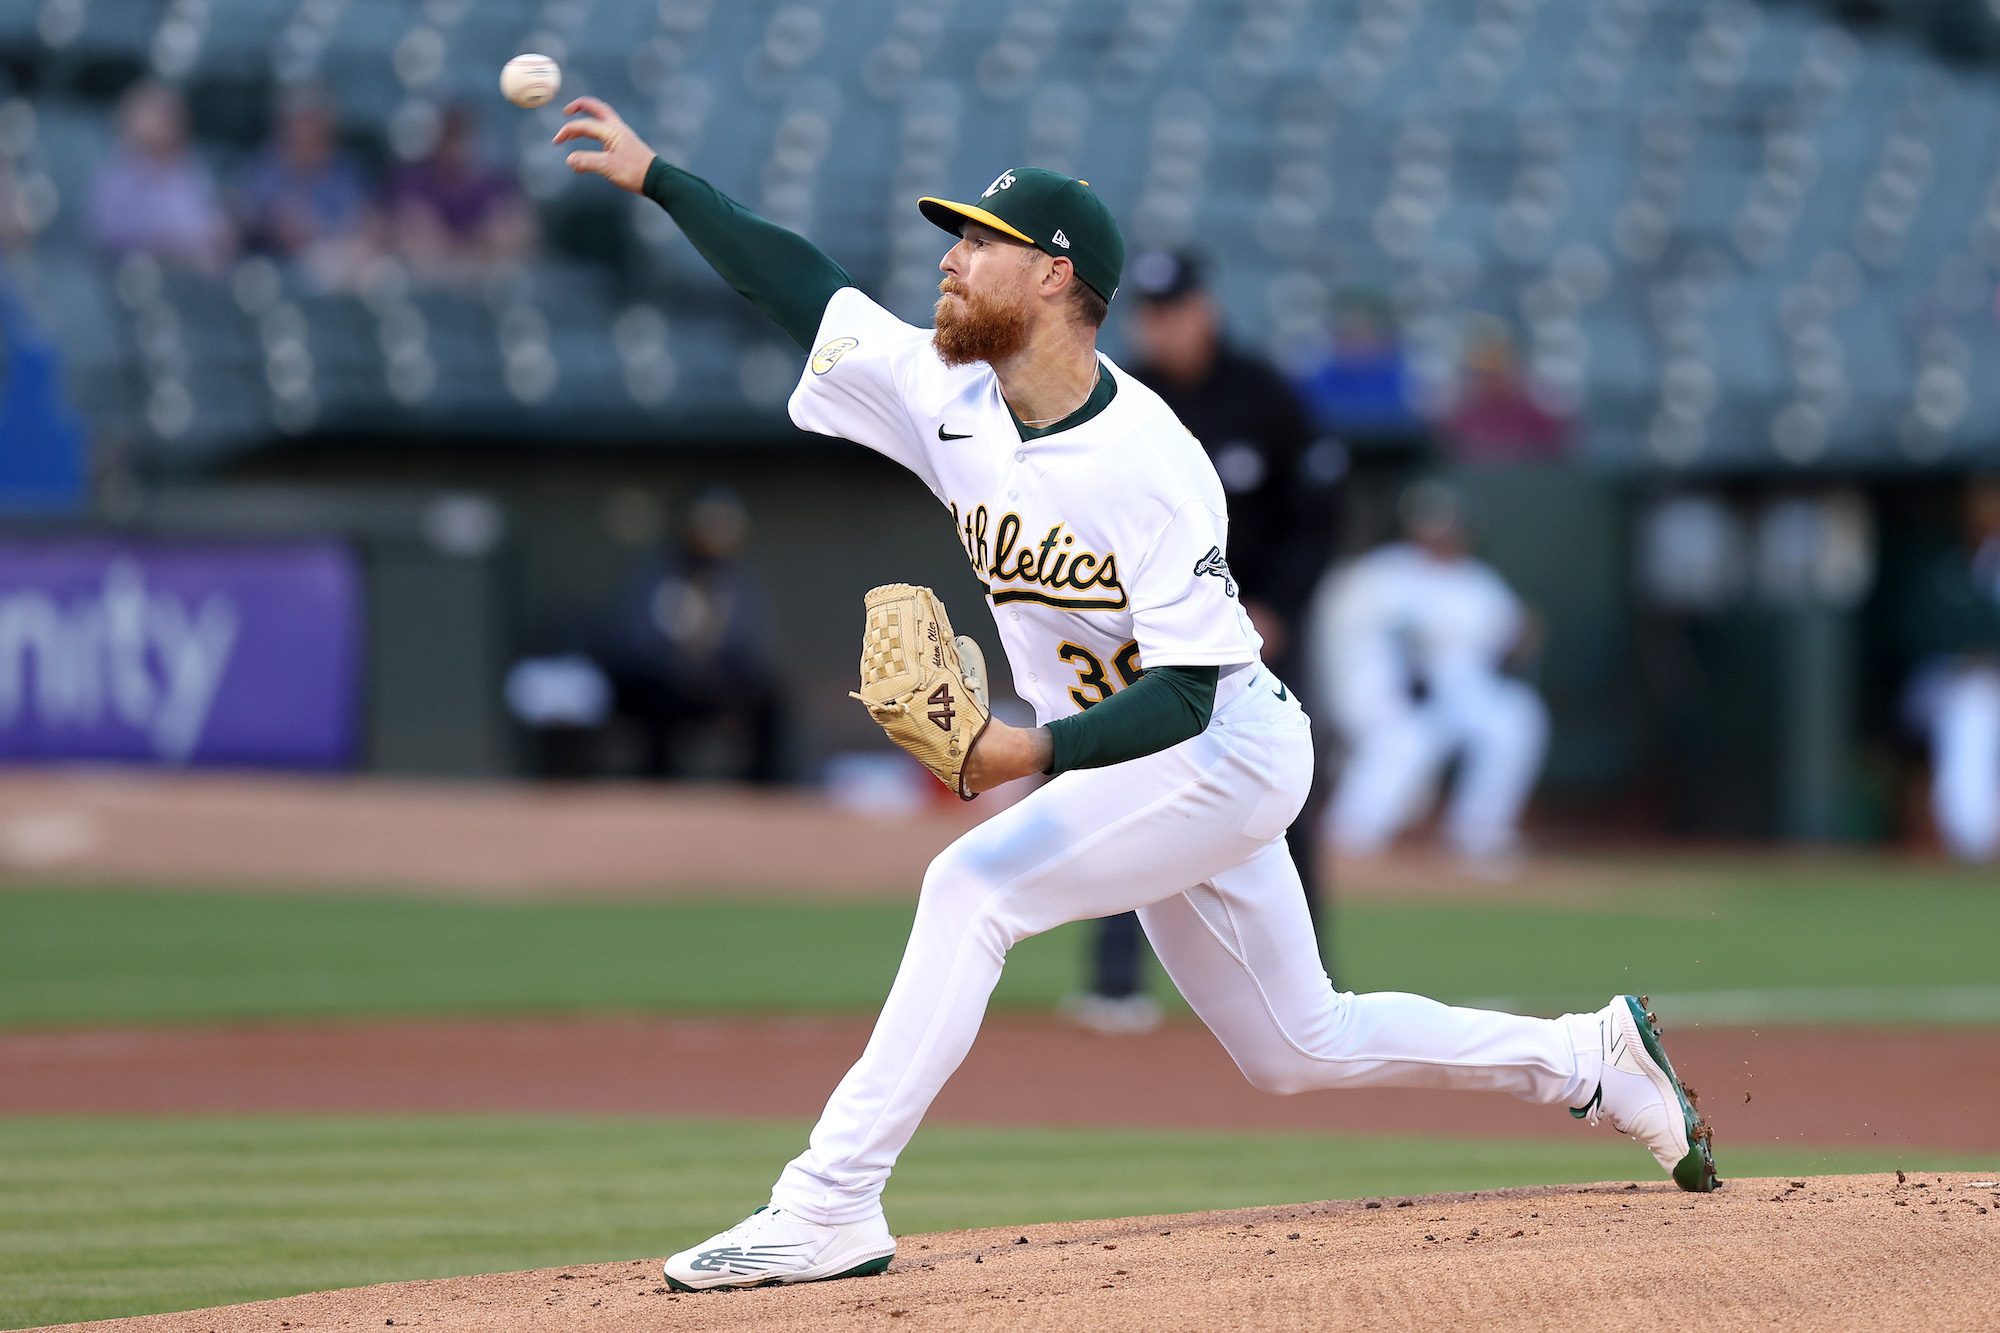 OAKLAND, CALIFORNIA - AUGUST 22: Adam Oller #36 of the Oakland Athletics pitches against the Miami Marlins in the first inning at RingCentral Coliseum on August 22, 2022 in Oakland, California. (Photo by Ezra Shaw/Getty Images)